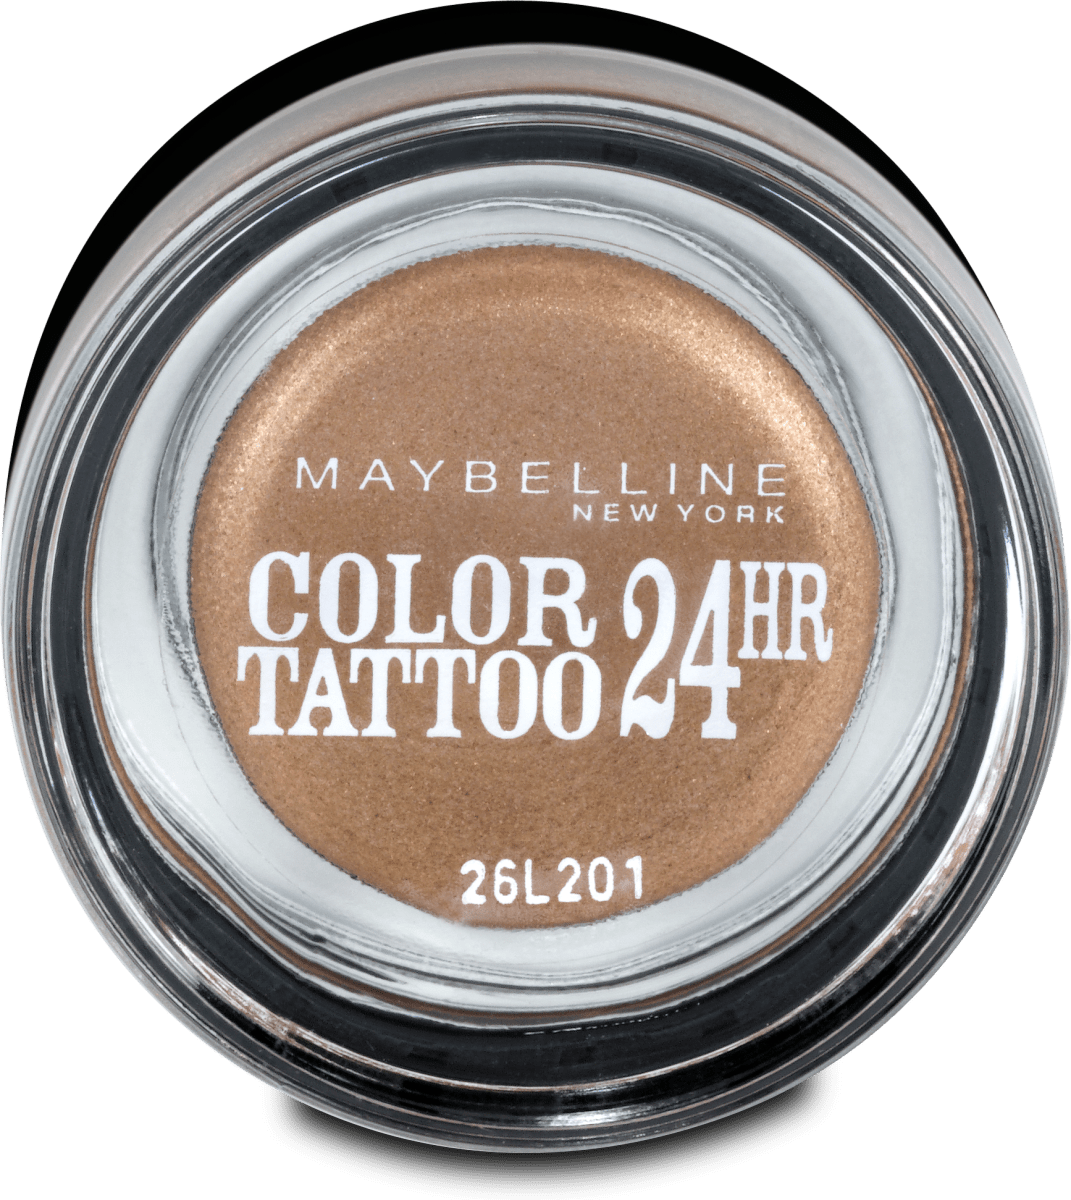 Bronze, ml Tattoo New Lidschatten Color Maybelline York 3,5 On On And 35 24hr